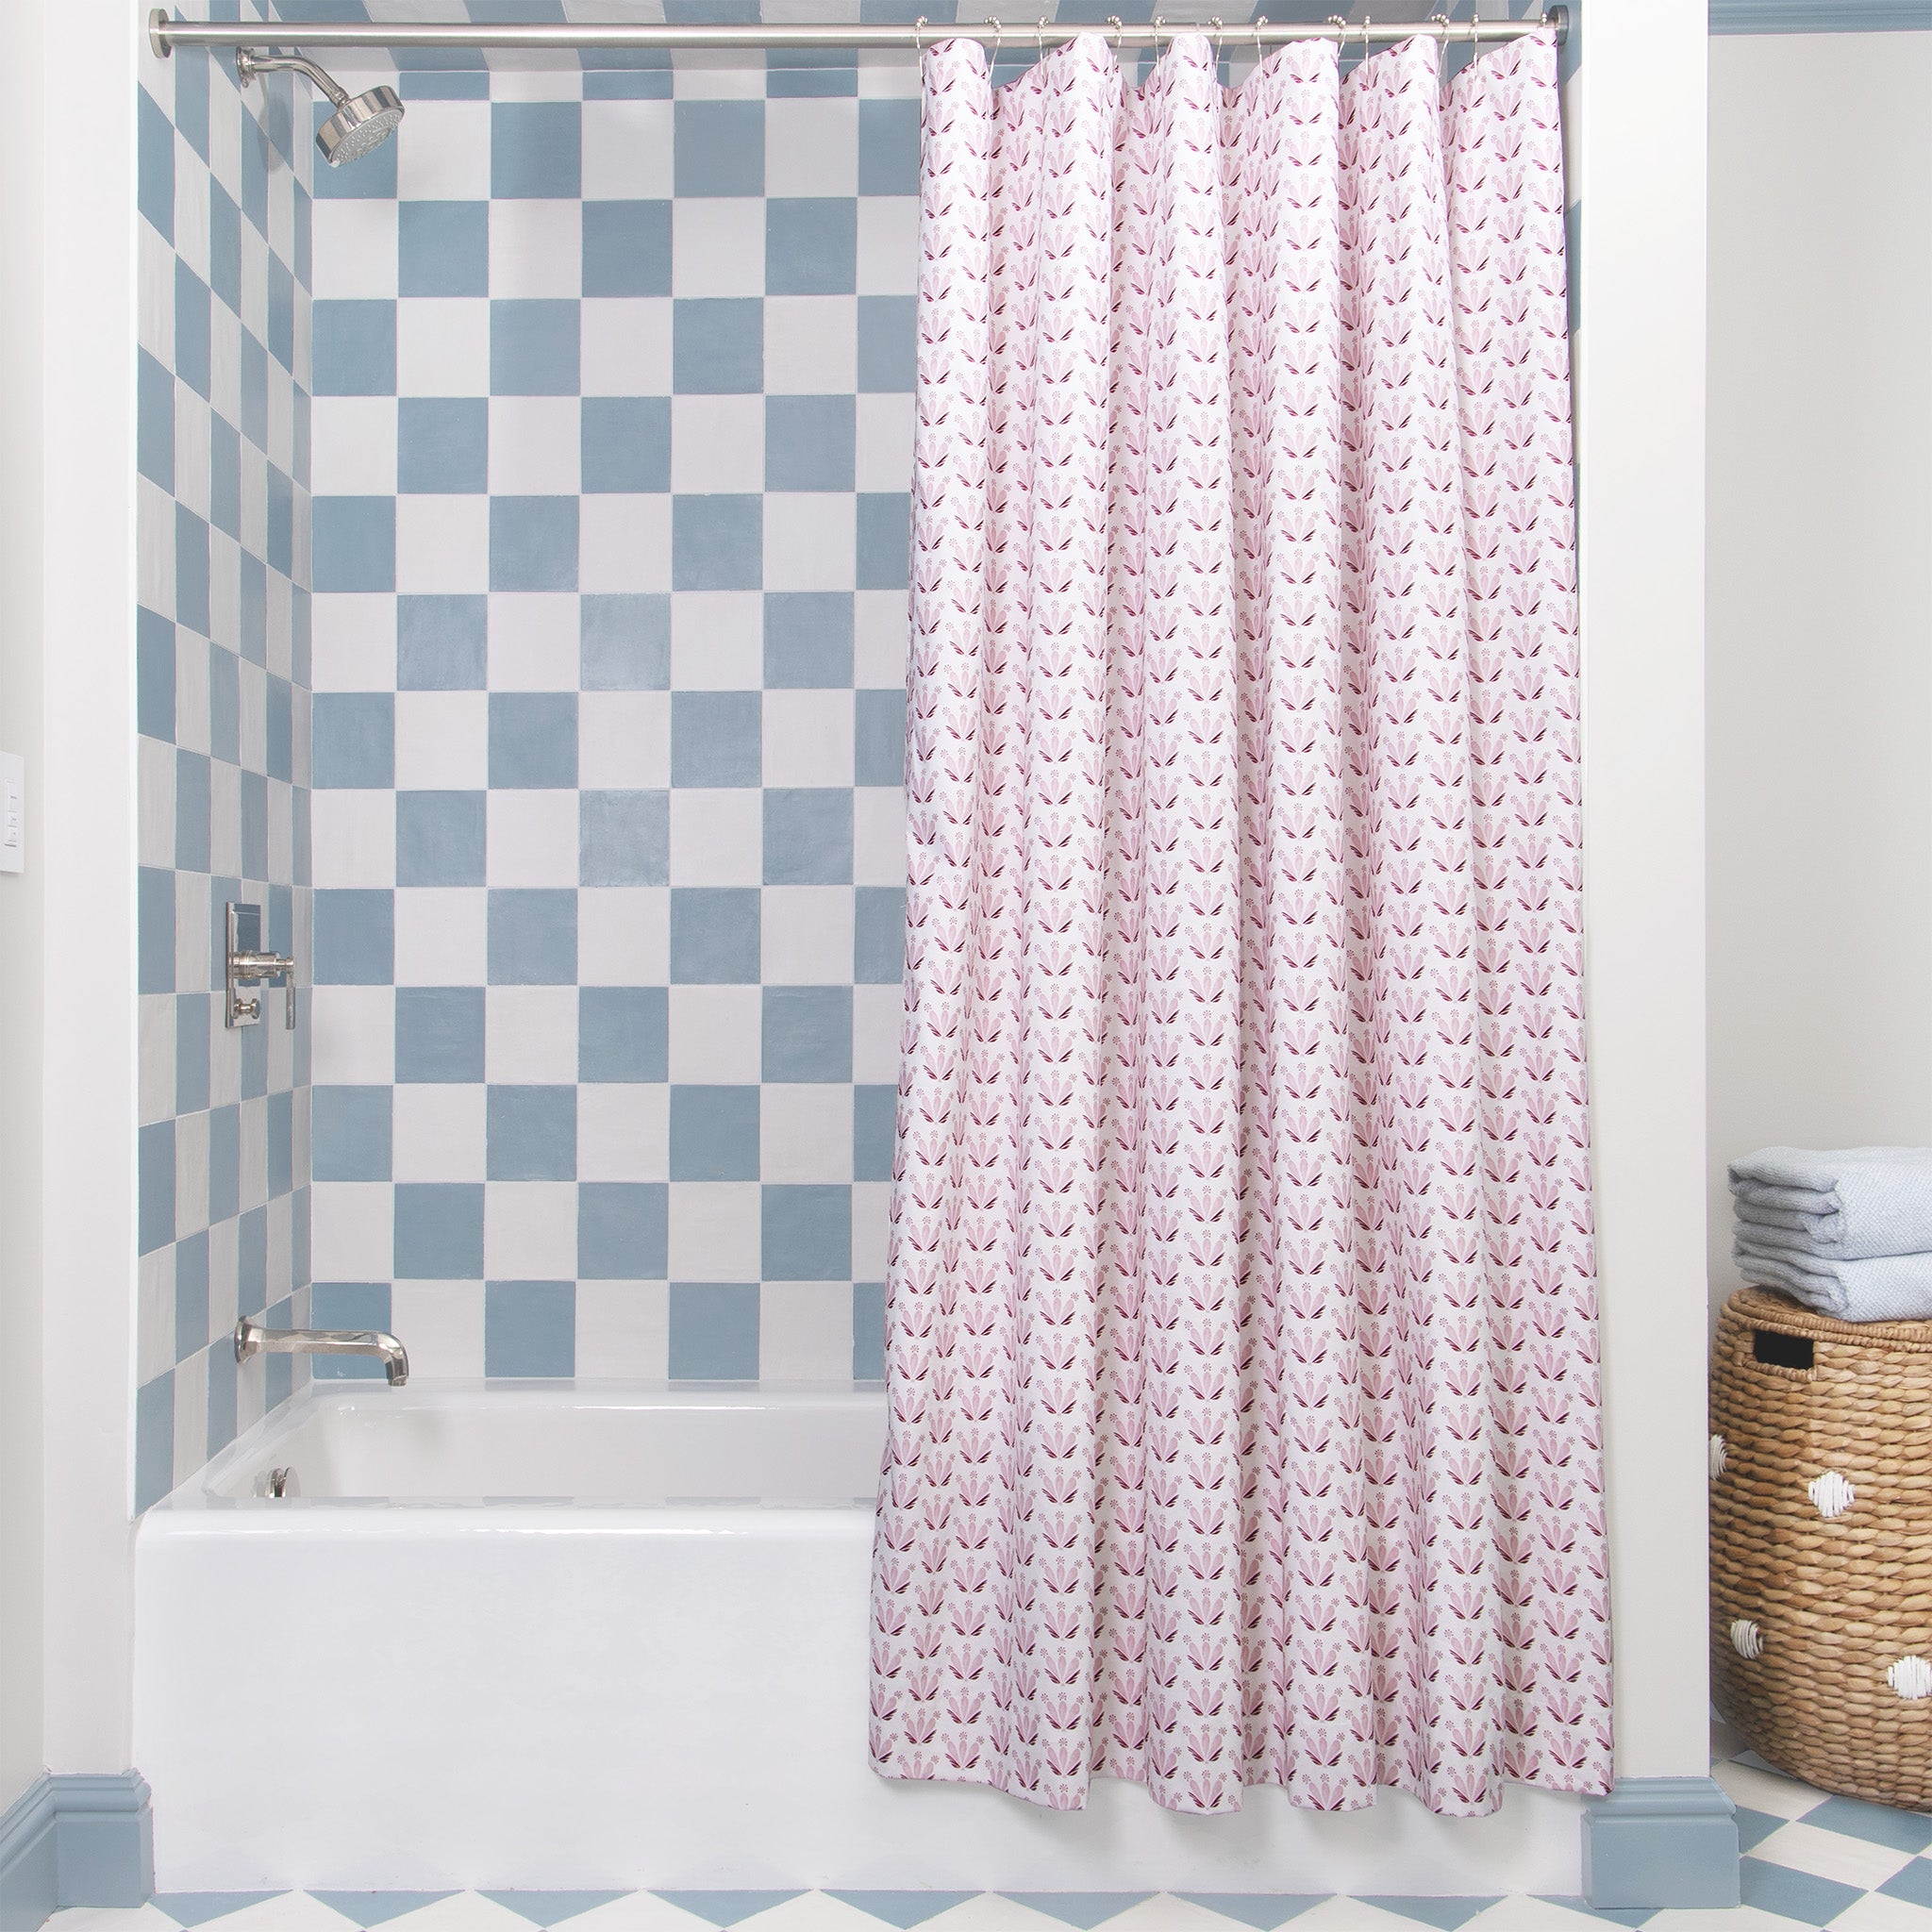 Curtain Track as a Ceiling Mounted Shower Curtain Rod - Erin Zubot Design